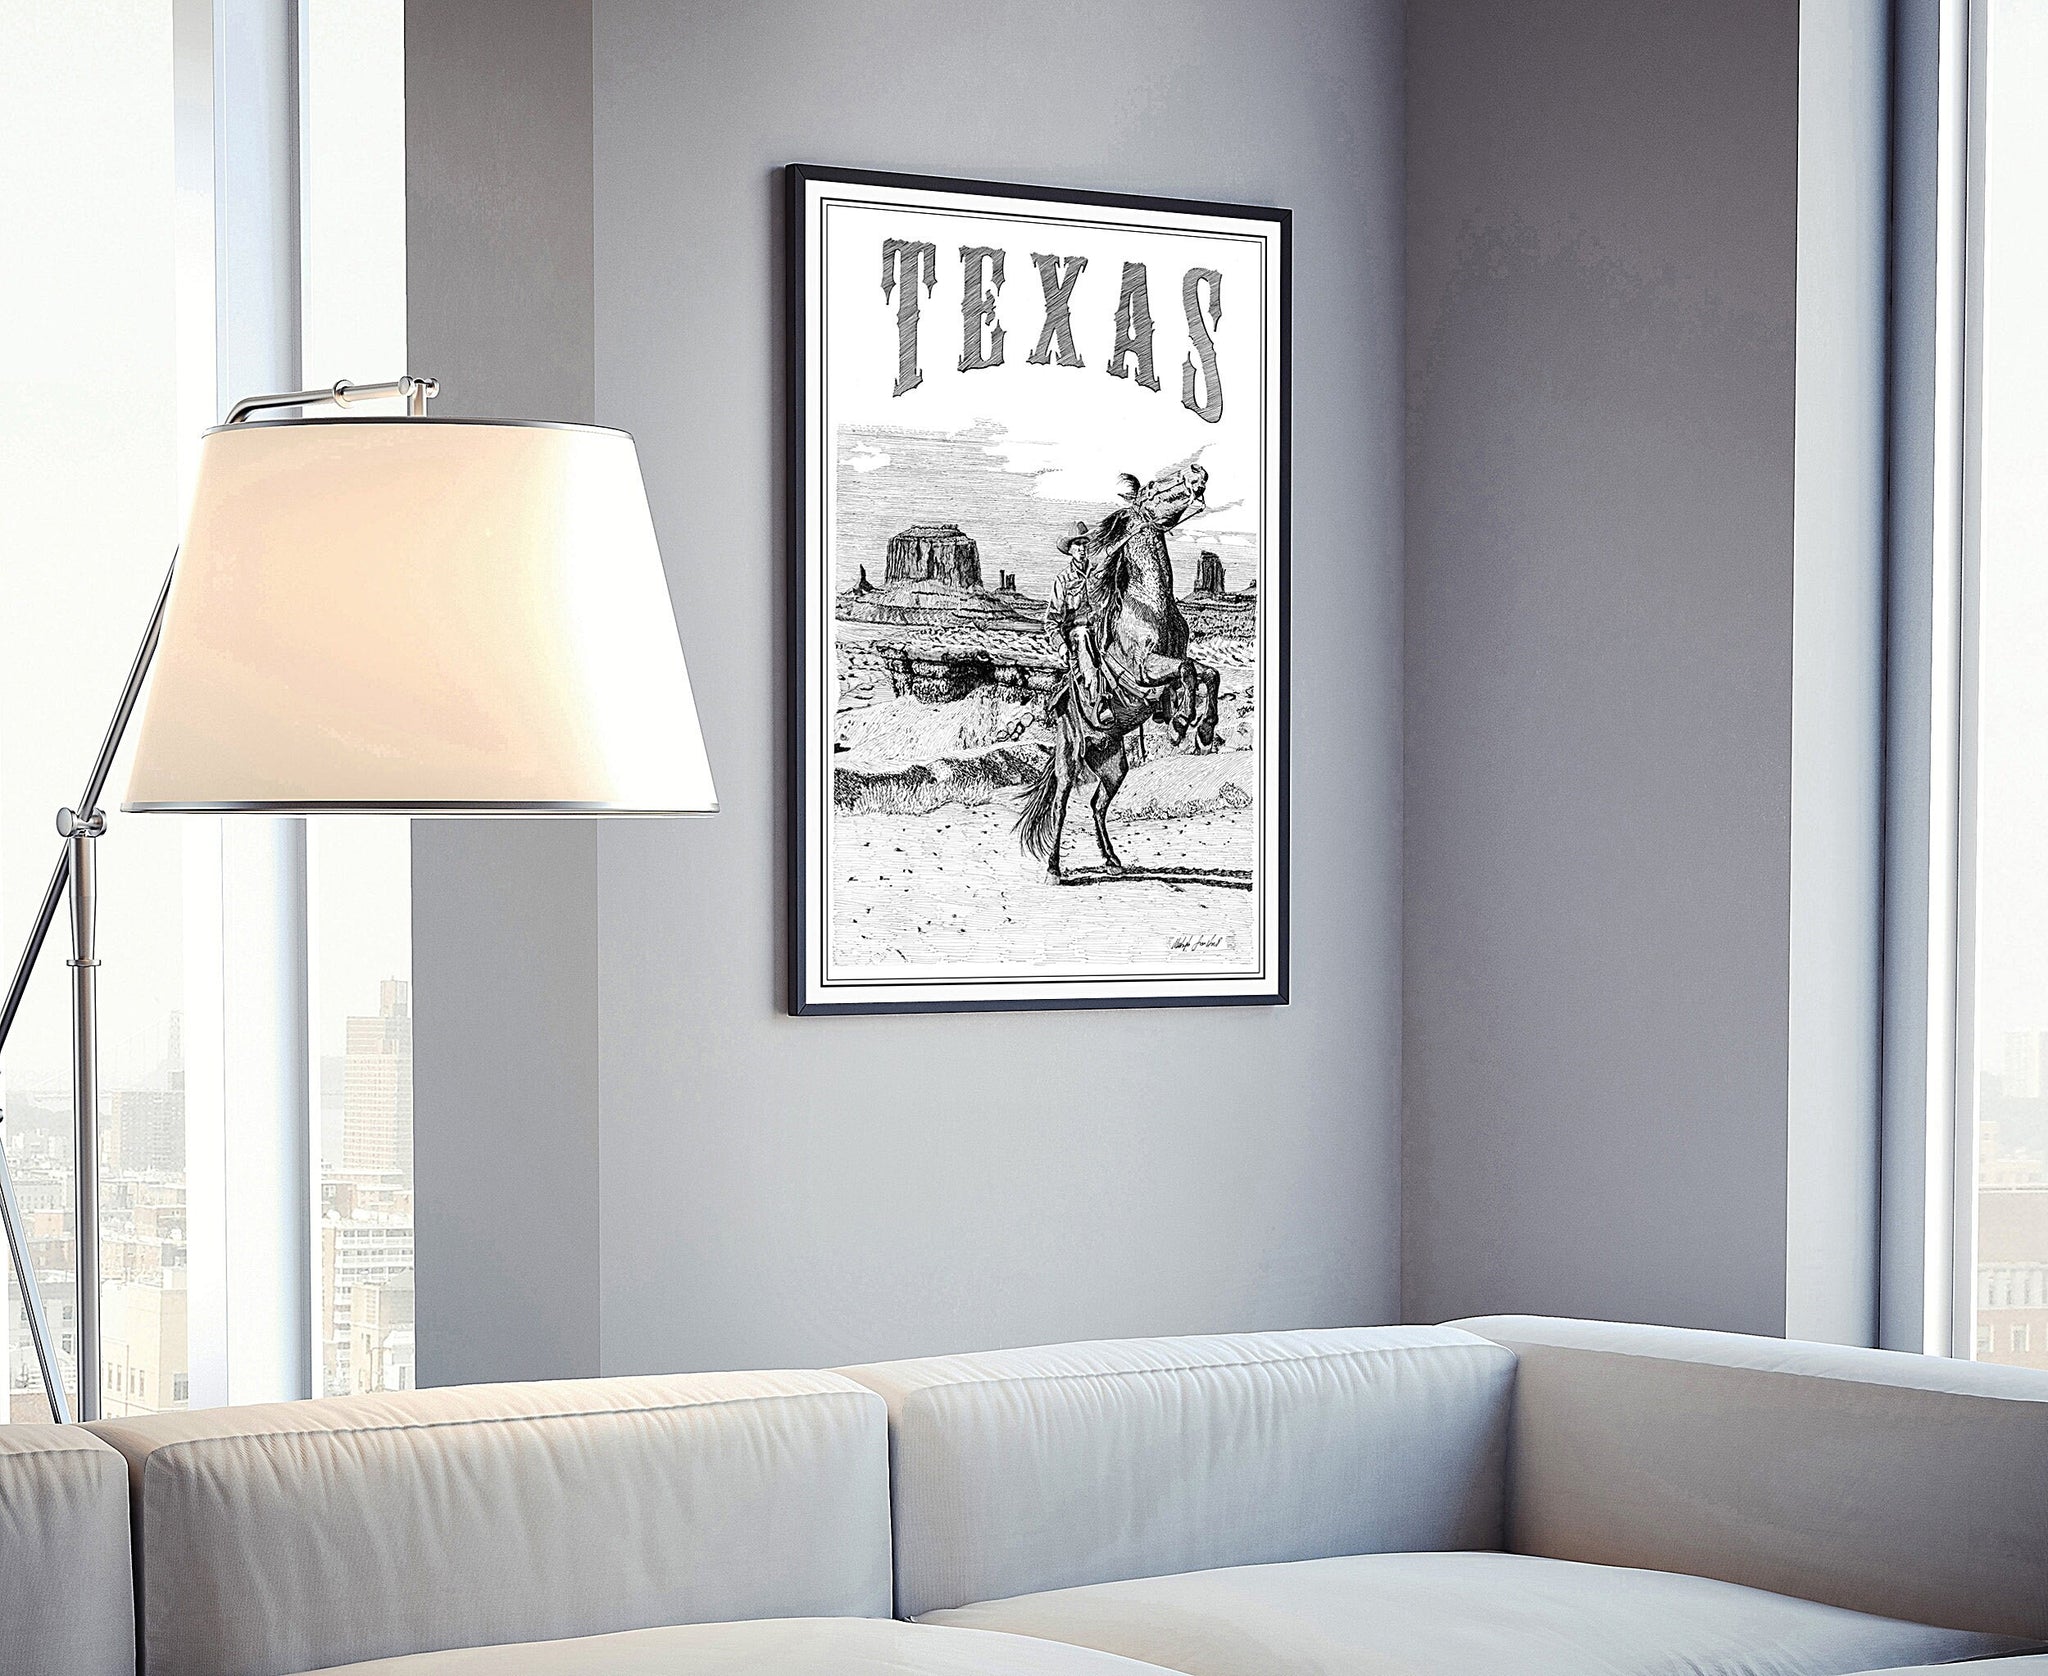 Hand made Retro Style Travel Poster, Texas Vintage Rustic Poster, Gravure Technique Paint, Calligraphy States Poster Print, State Map Poster